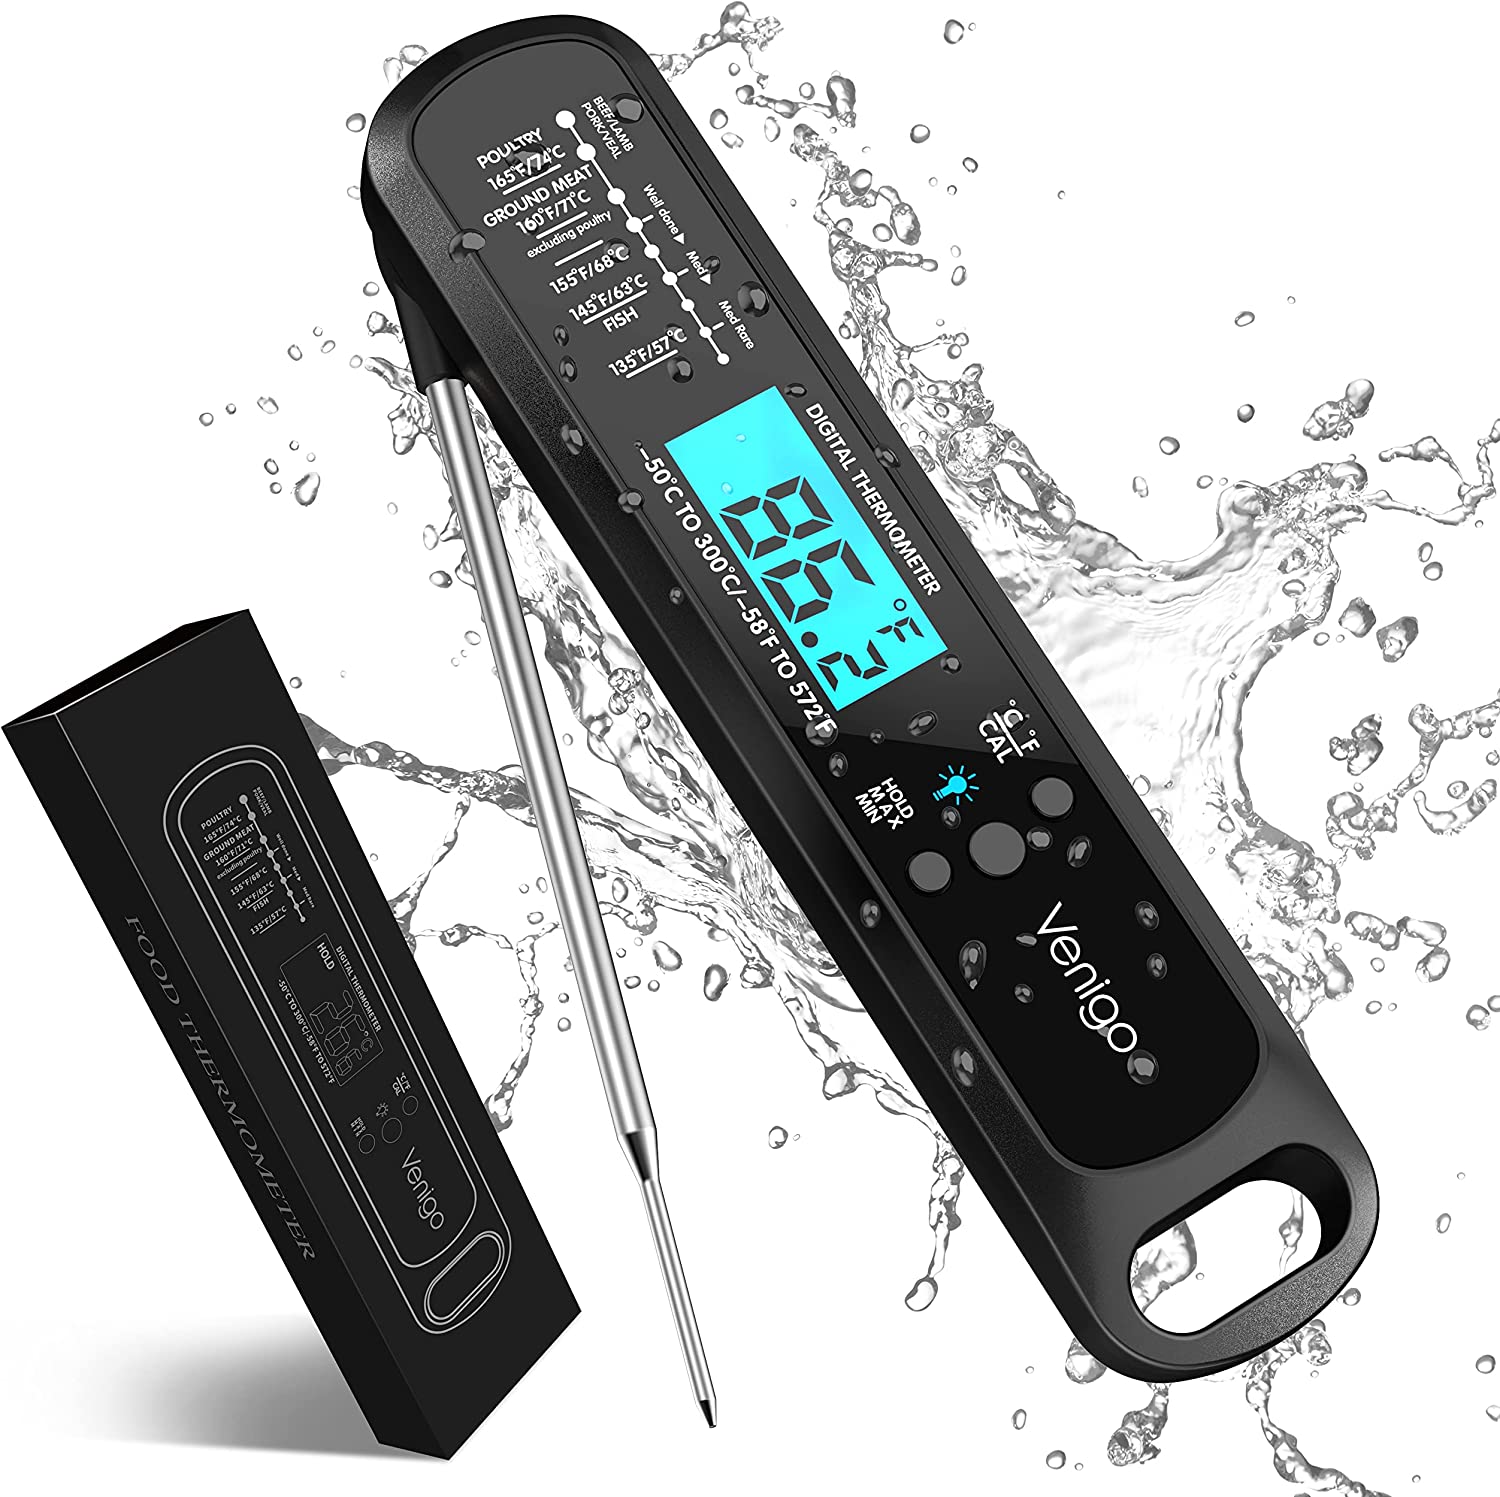 Wholesale Waterproof Digital Instant Read Meat Thermometer with 4.6 Folding  Probe Backlight & Calibration Function From m.